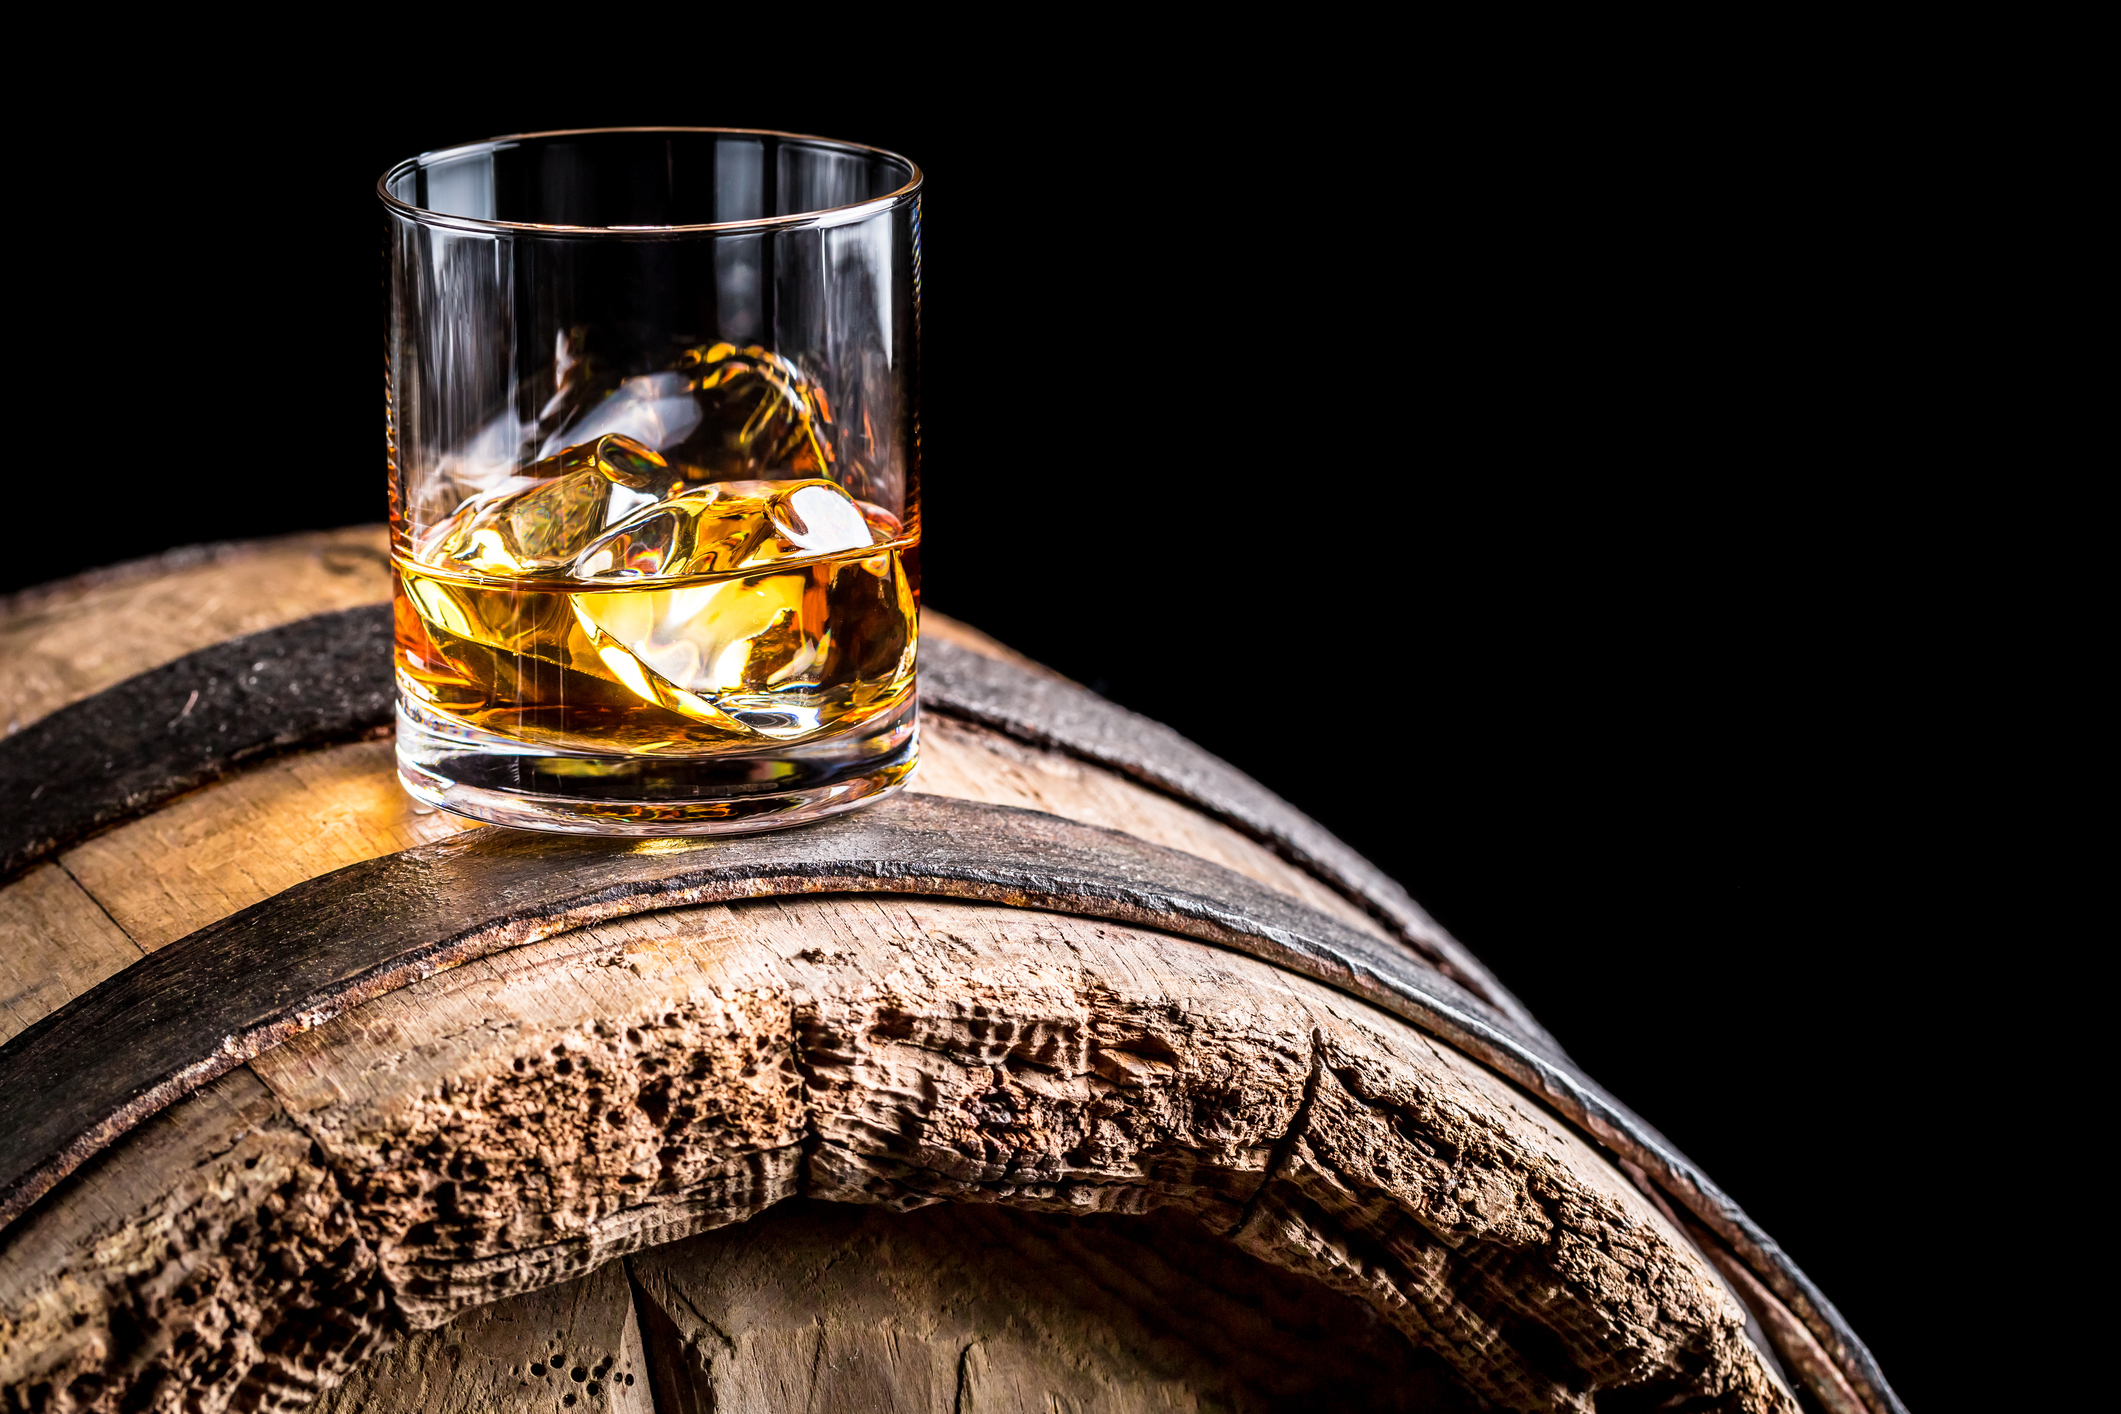 Whisky festivals can be held at the Adam Smith Theatre under its extended licence